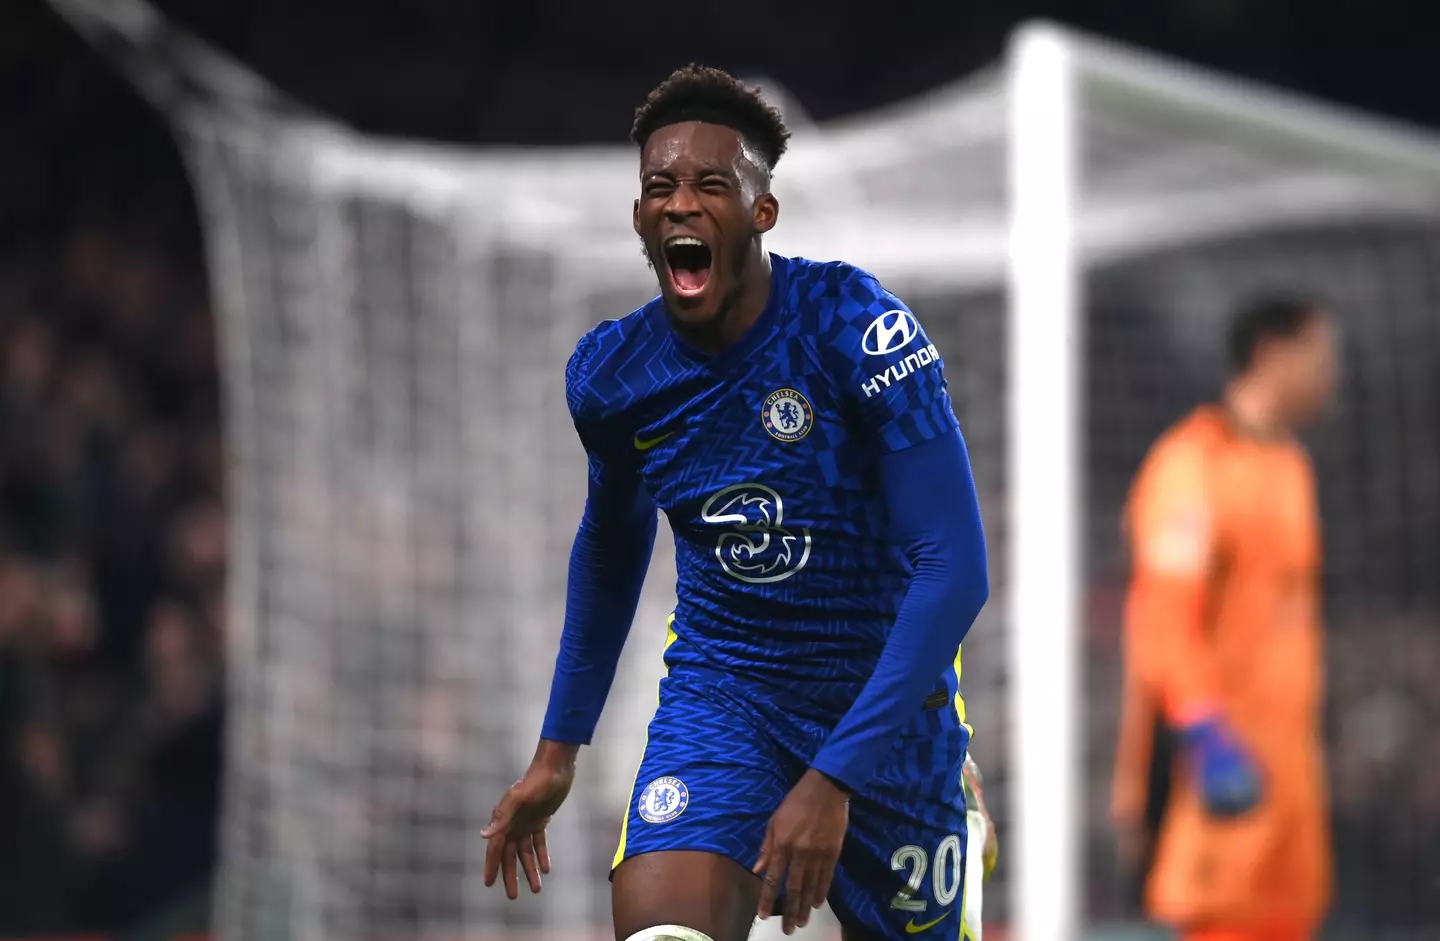 Hudson-Odoi was once the next-big-thing at Chelsea (Getty)